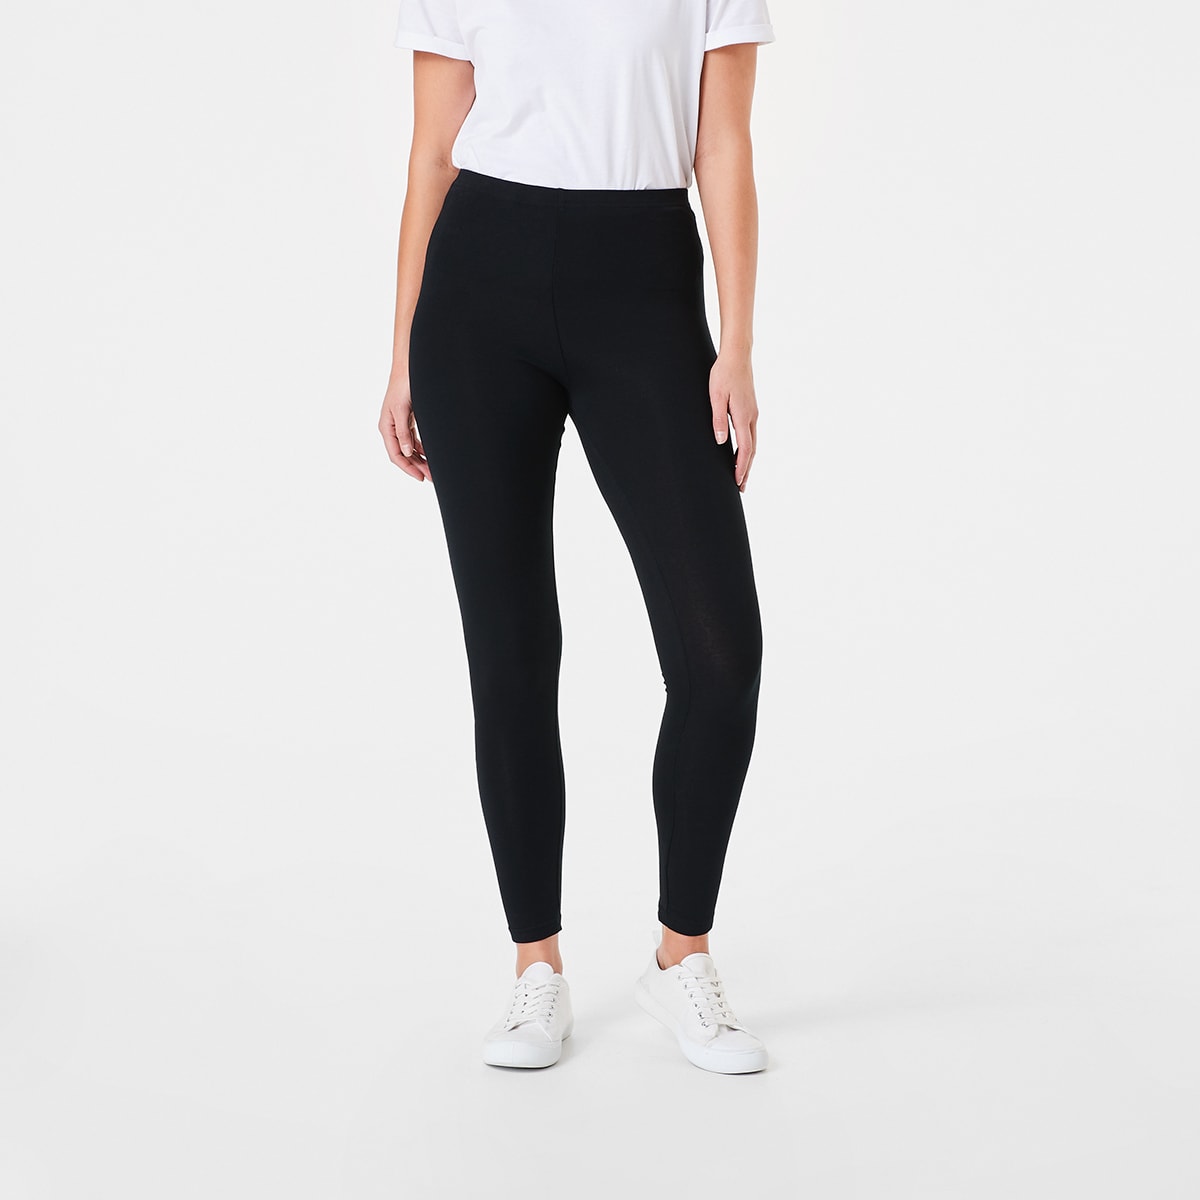 Squat in style with our $18 leggings... - Kmart New Zealand | Facebook